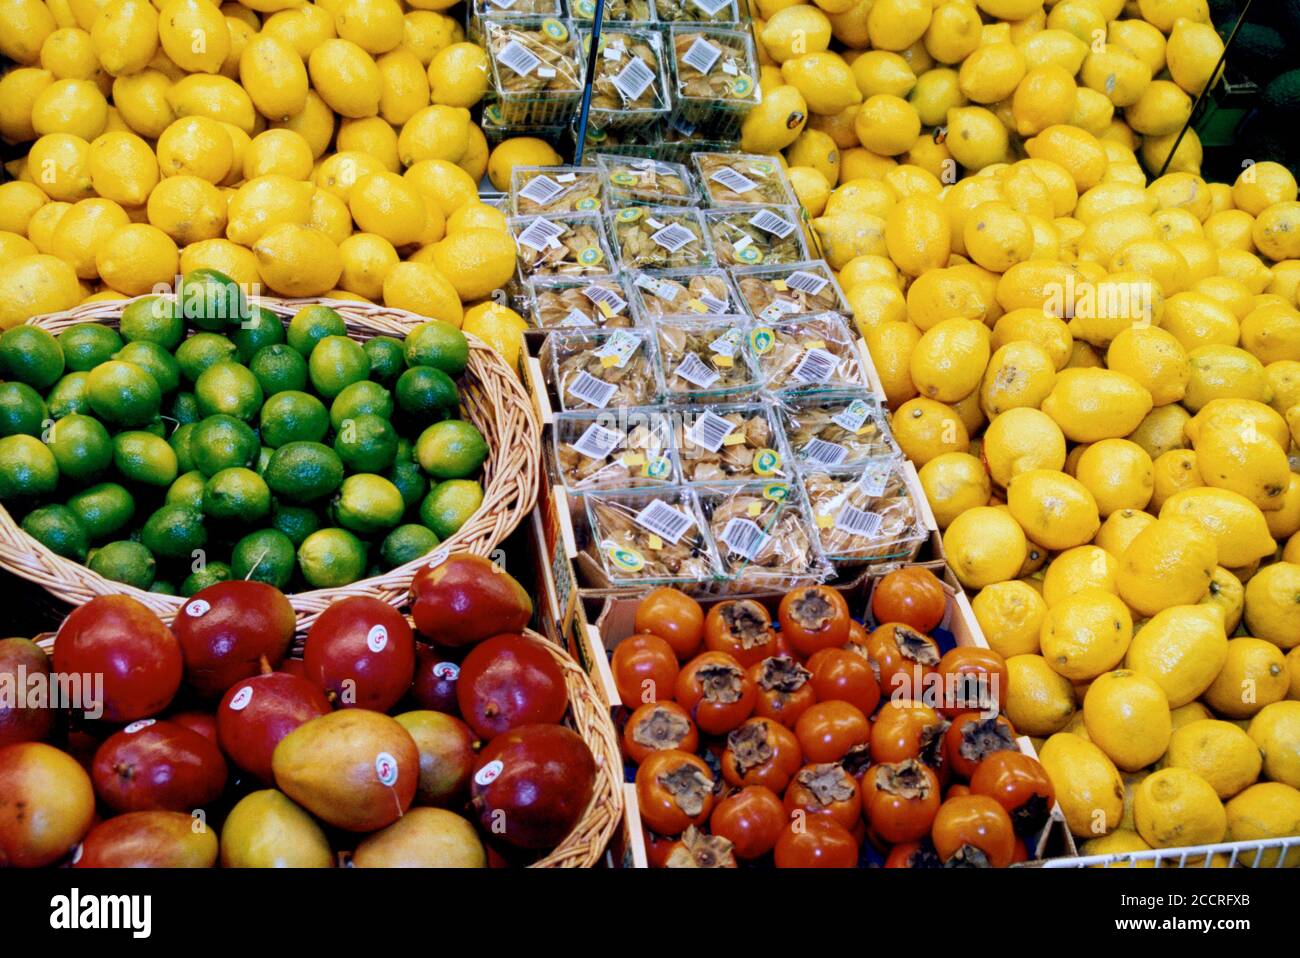 CITRUS FRUIT Displayed in Shop counter Stock Photo